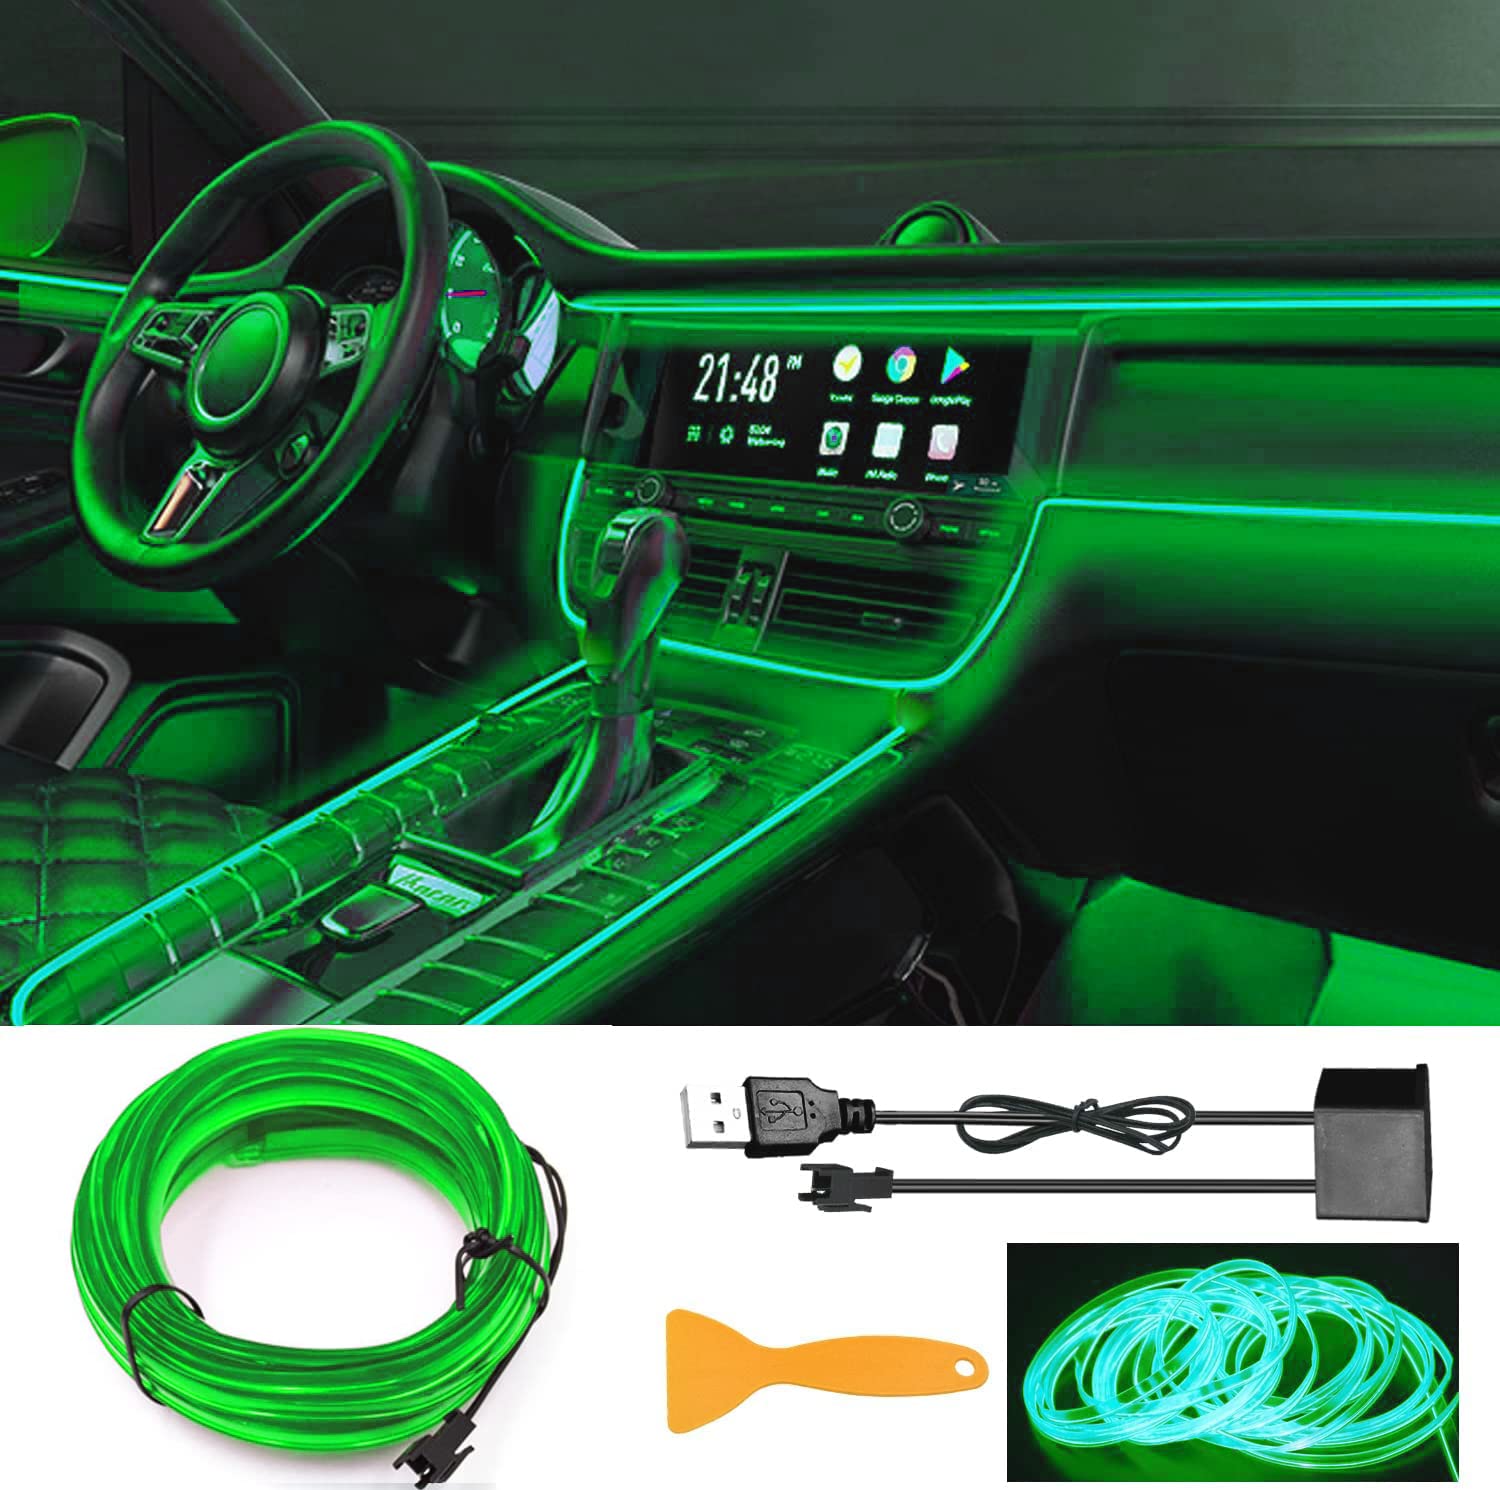 EL Wire Car LED Interior Lights Strip USB Neon Wire Lights 197 inch 6mm Sewing Edge Glowing EL Wire Lights for Car Ambient Lighting Kit 5M/16.5ft Car Decorations LED Lights for Car Interior (grün) von YEKUYEKU